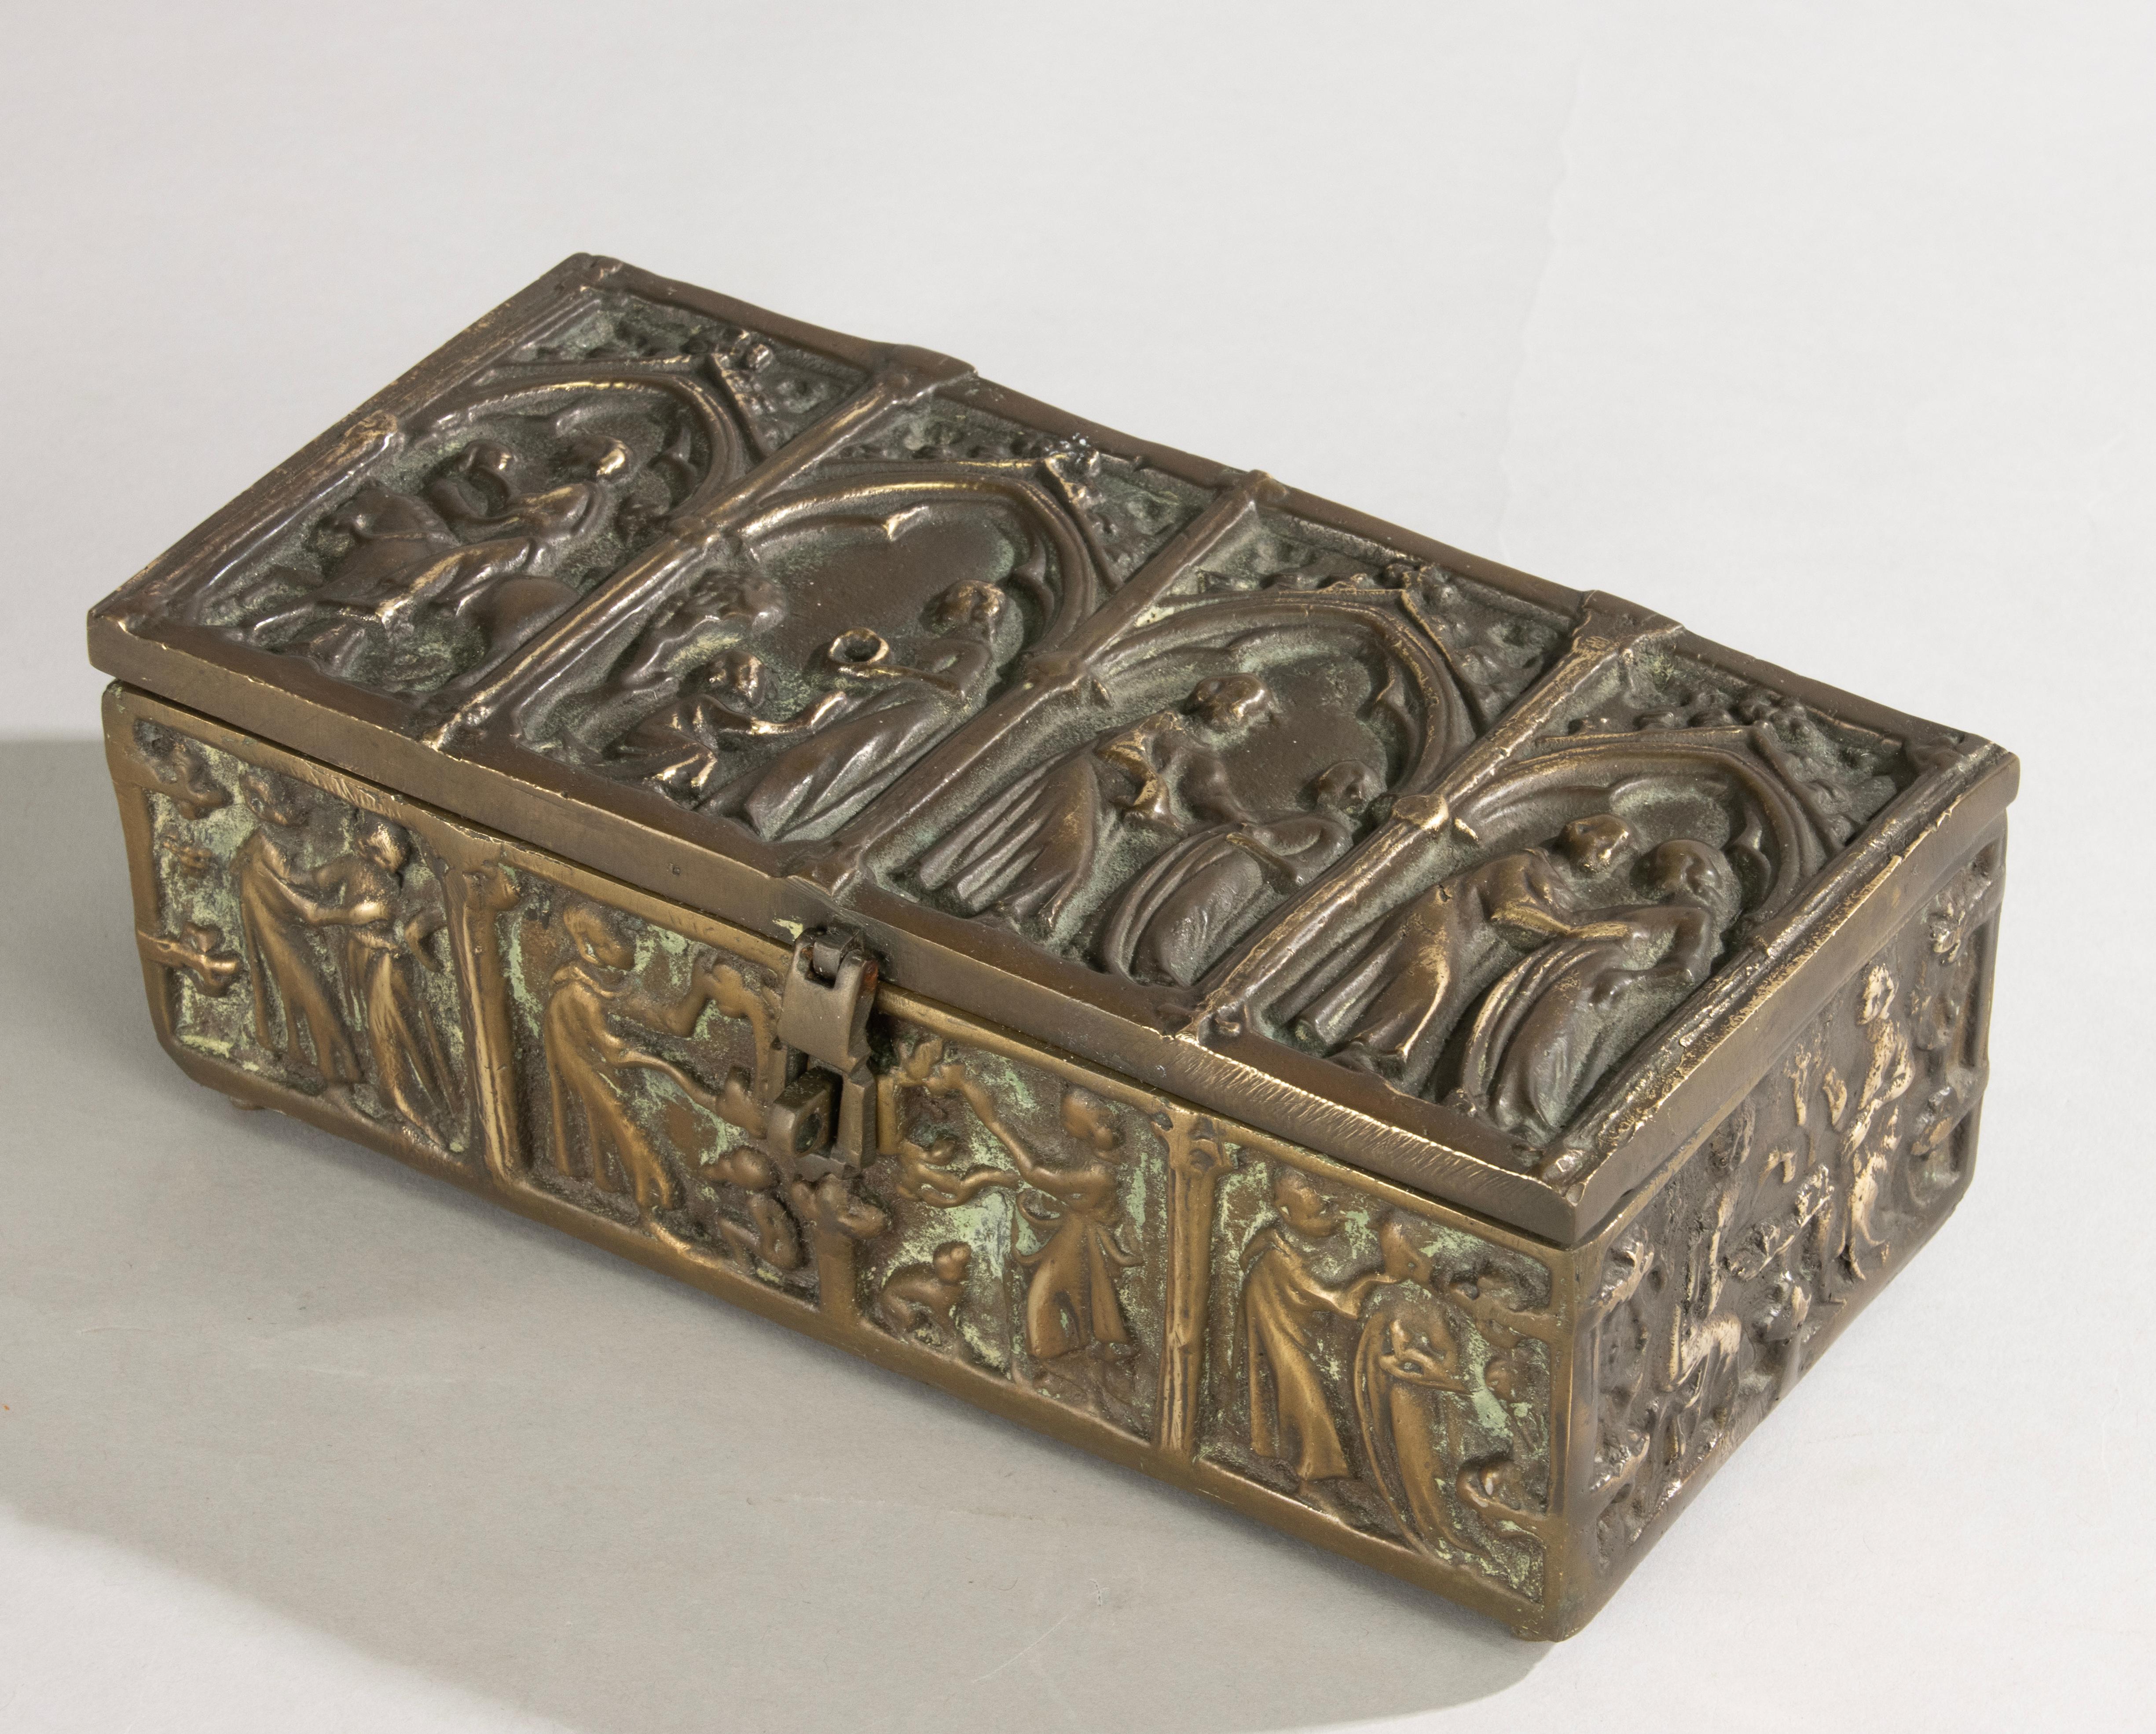 A nice antique brass box, with beautiful Gothic style scenes. The box is in good condition. Beautiful color and old patina.
Estimated age and origin: Belgium, circa 1910.
Dimensions: 24 x 12 cm and 9 cm high.
Free shipping worldwide